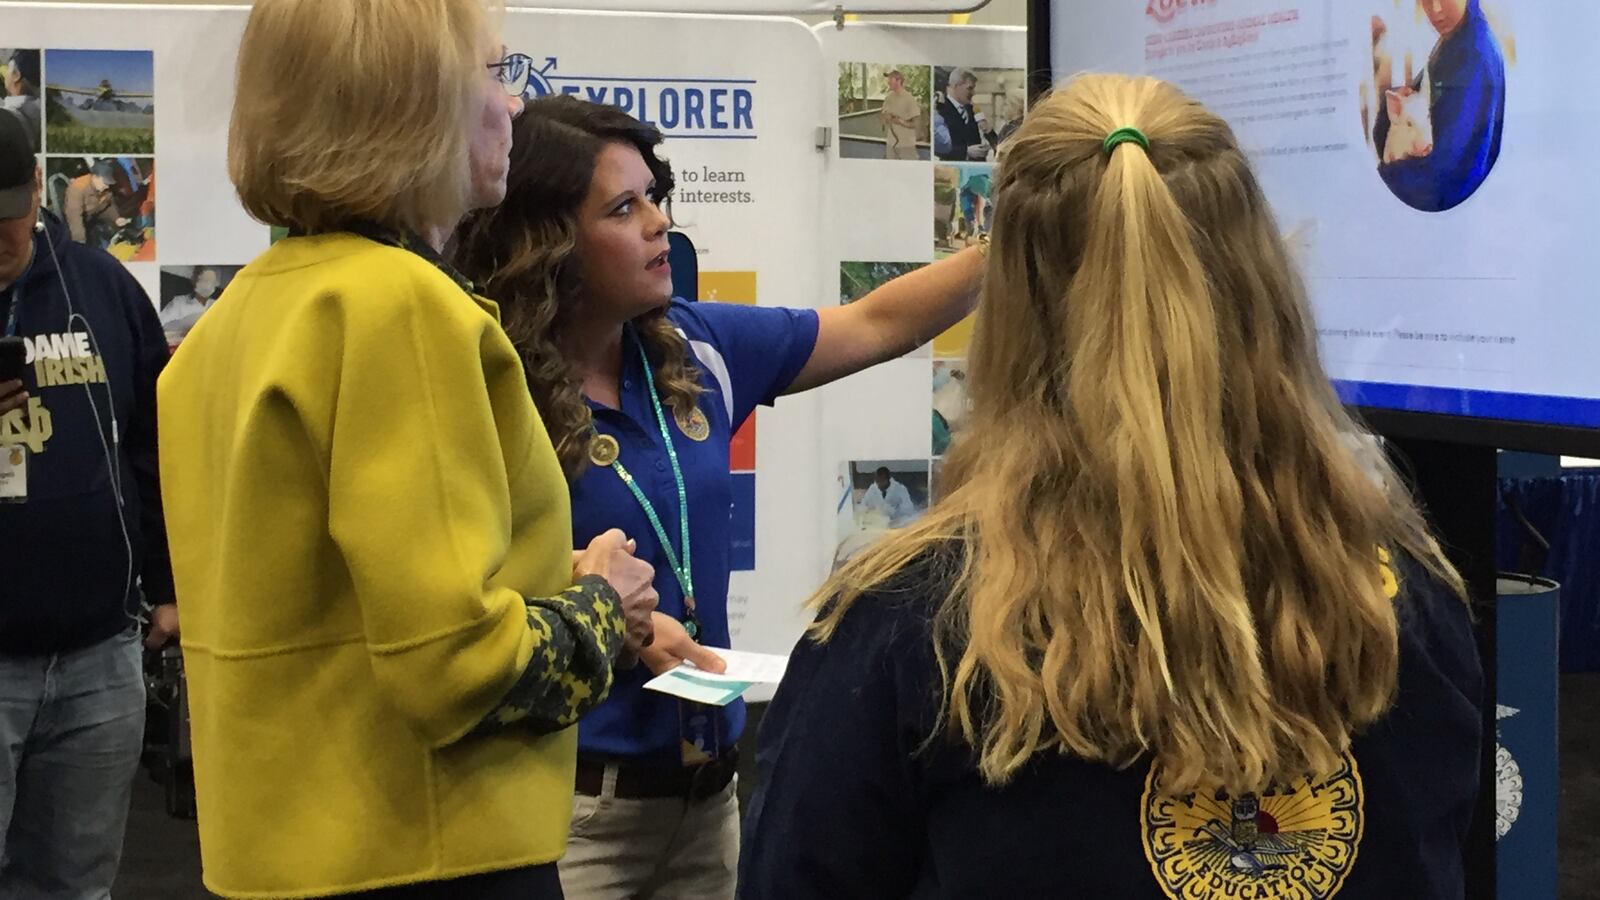 During her visit to the national FFA convention in Indianapolis, U.S. Secretary of Education Betsy DeVos spoke with a student and FFA staffer about a new tool to help kids learn about jobs in agriculture.